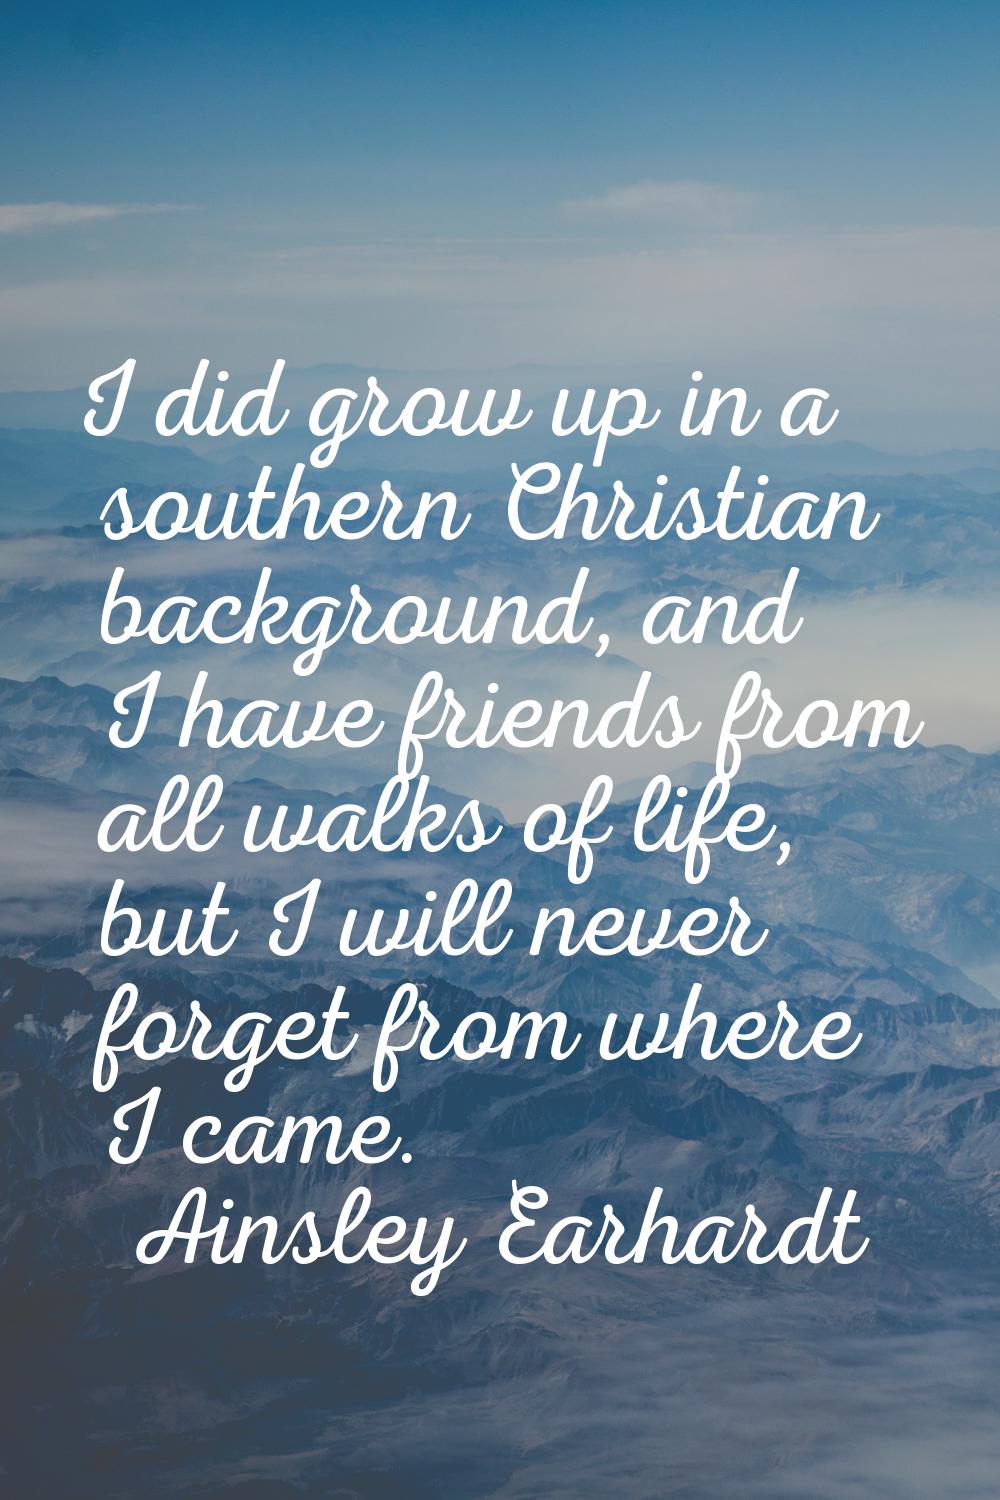 I did grow up in a southern Christian background, and I have friends from all walks of life, but I 